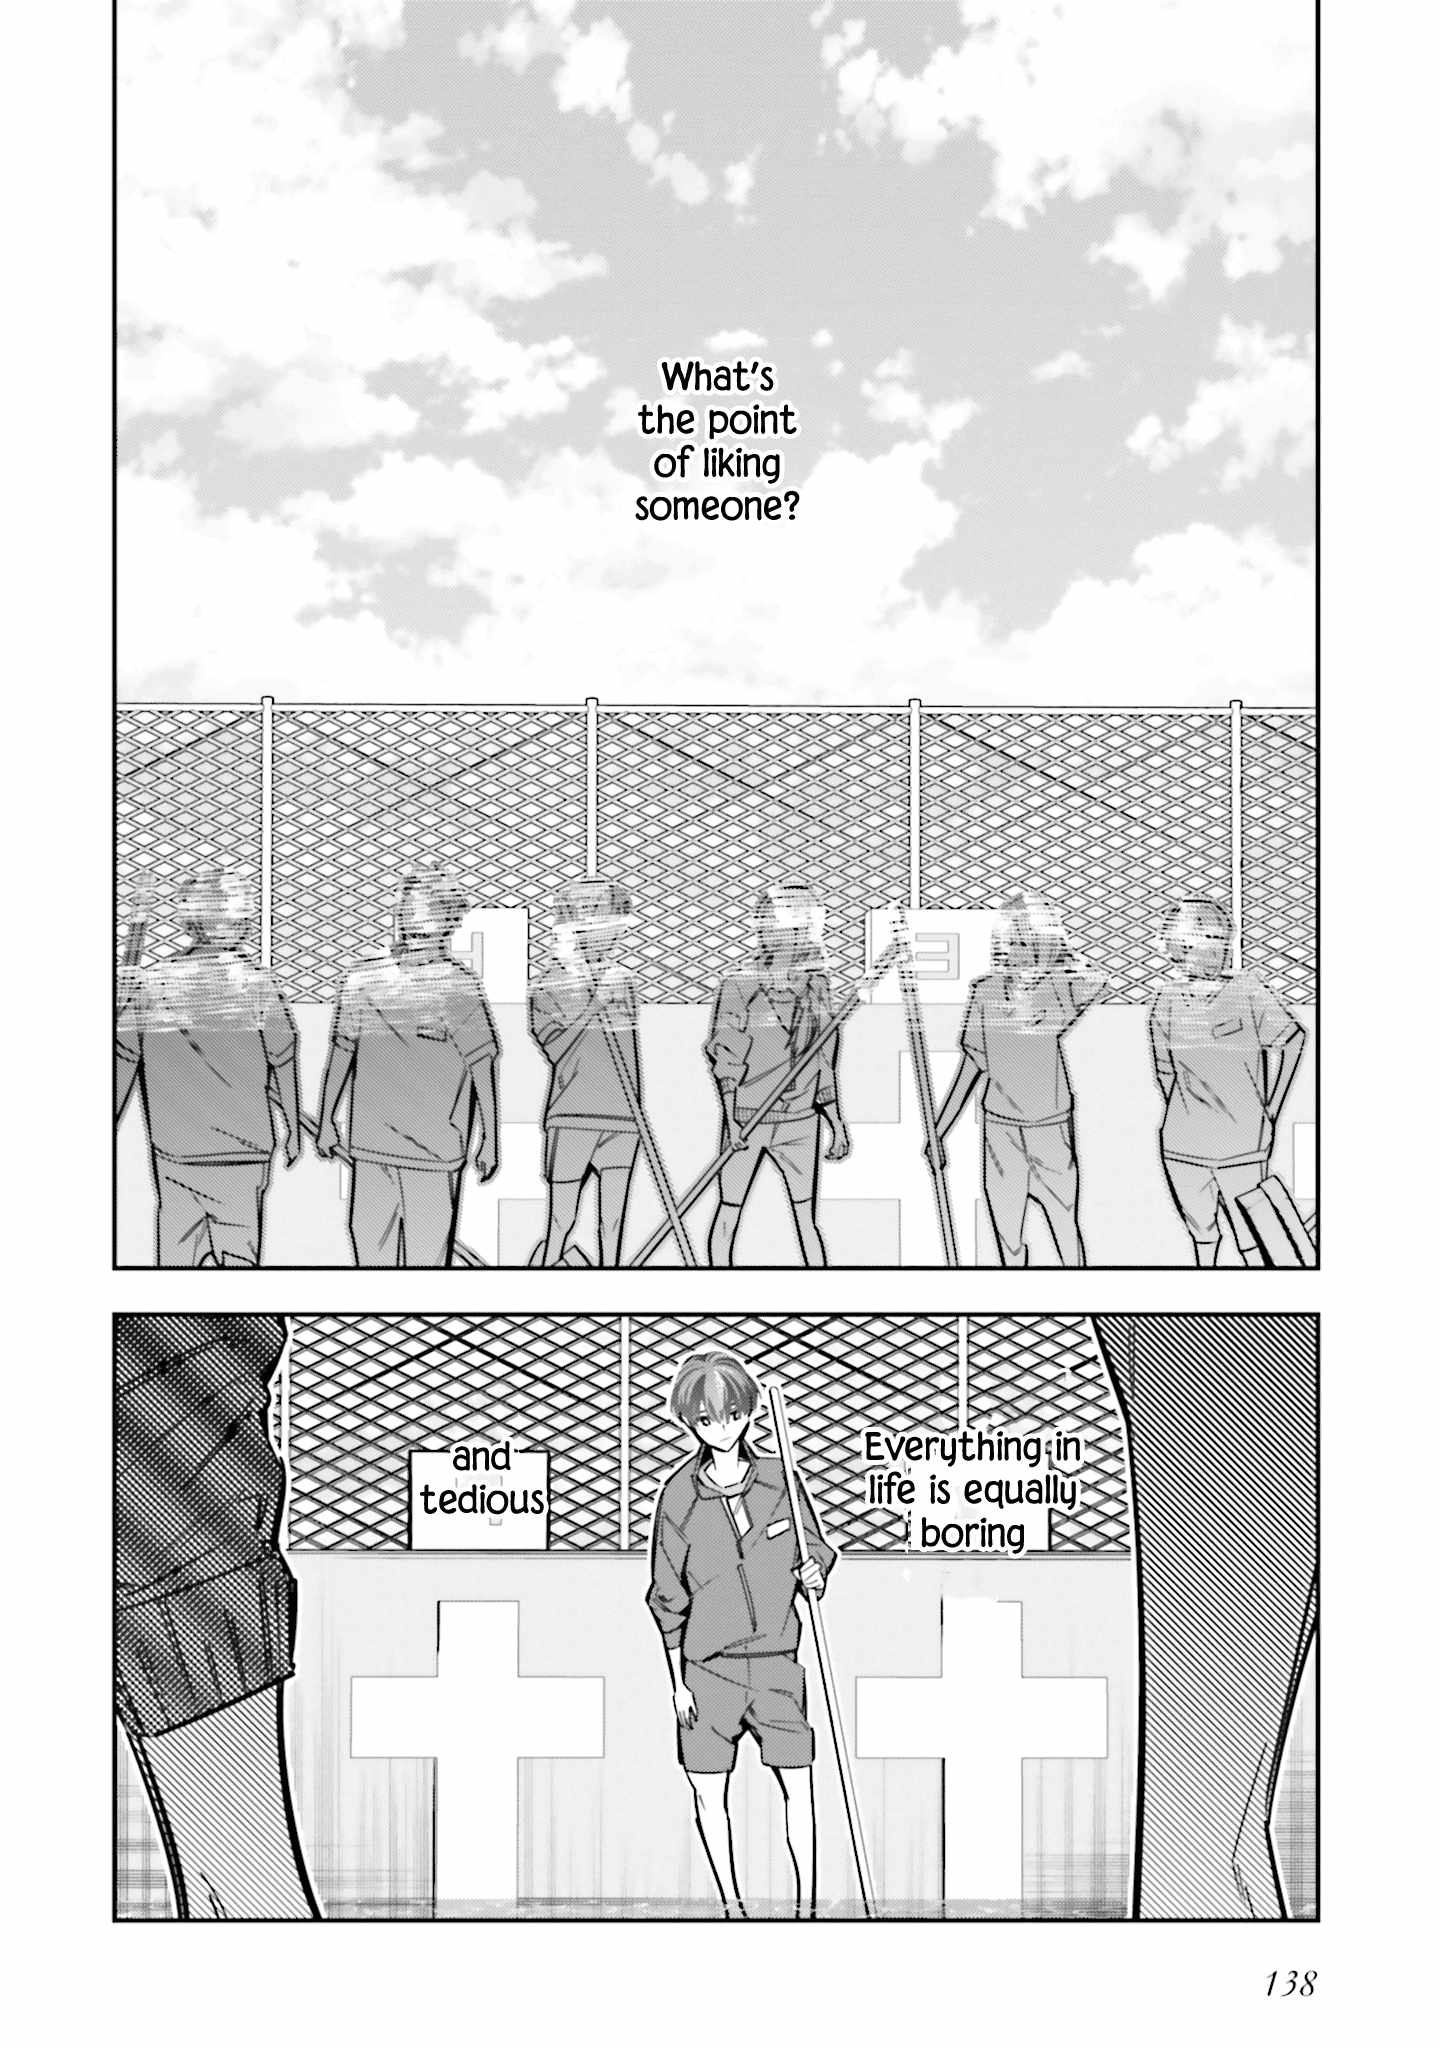 I Reincarnated as the Little Sister of a Death Game Manga's Murd3r Mastermind and Failed Chapter 13-5-eng-li - Page 7